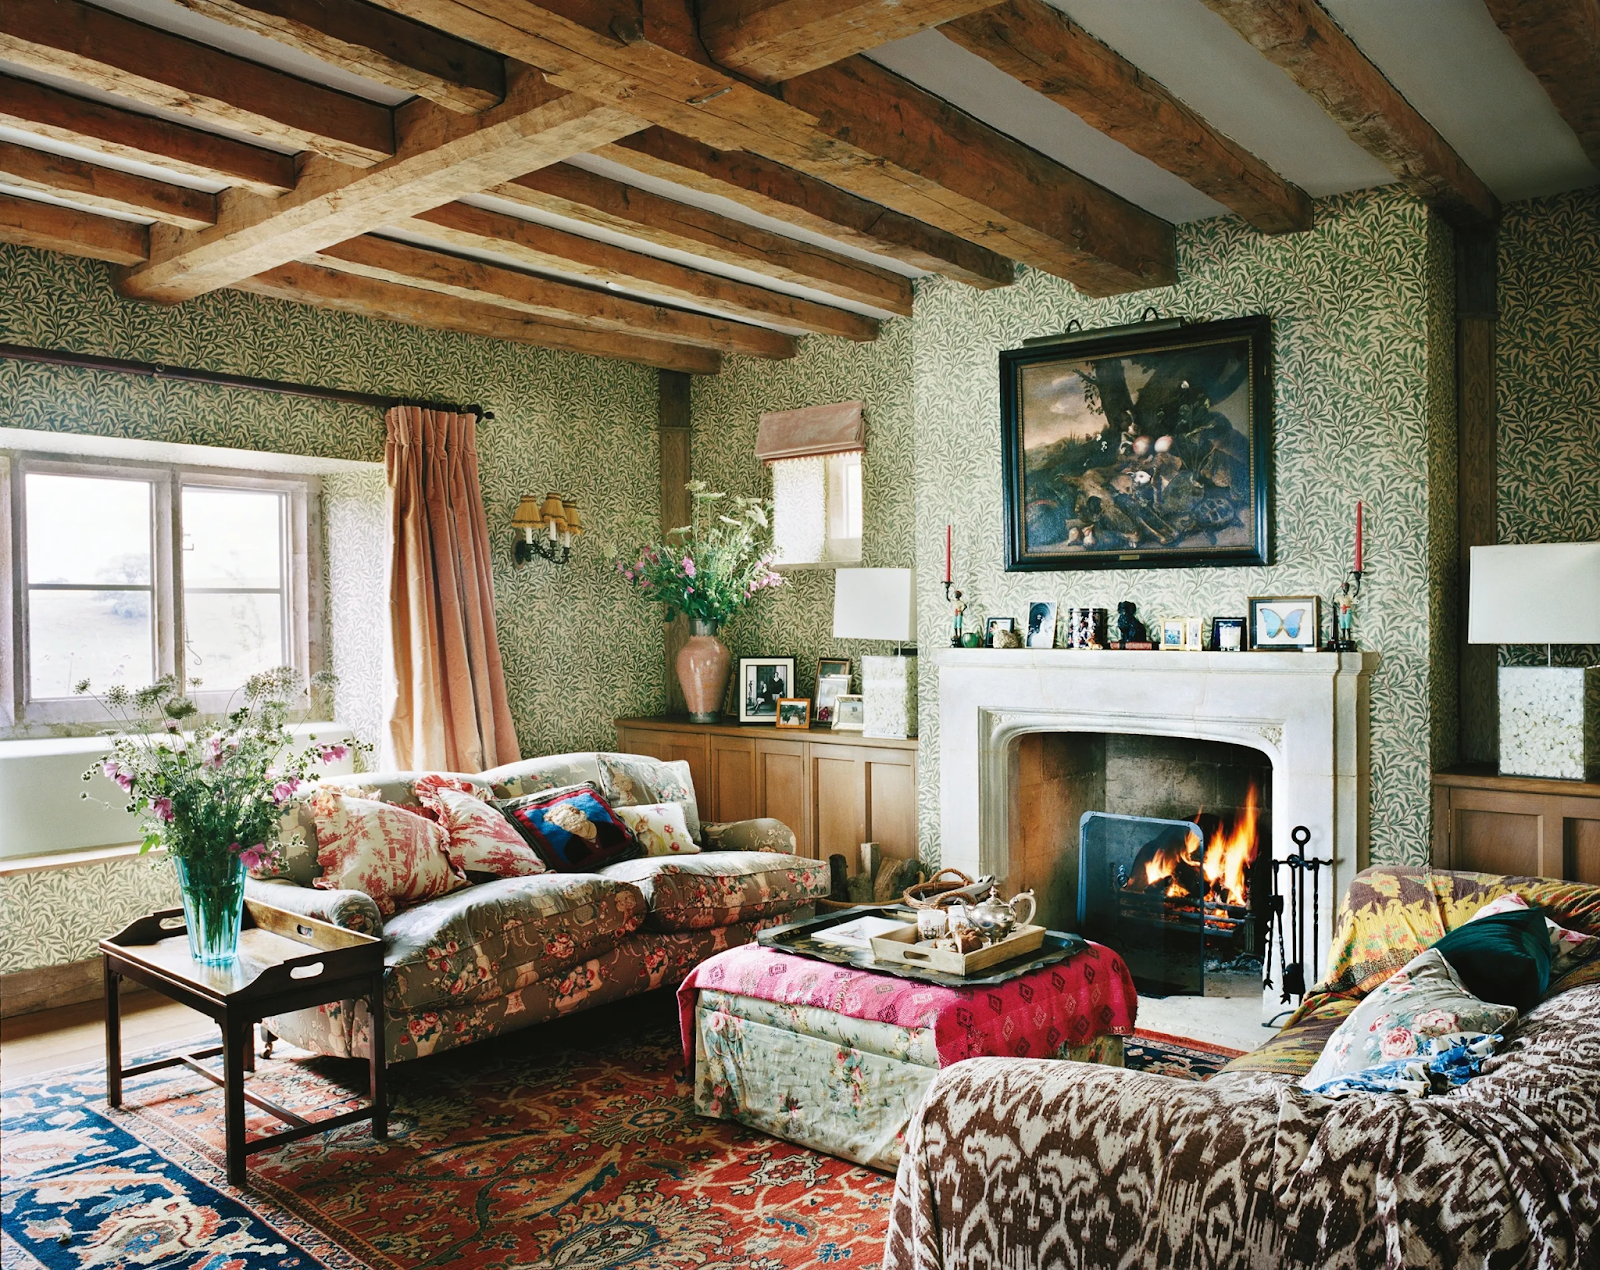 Granny chic design giving a warm living space with colorful wallpaper and furniture